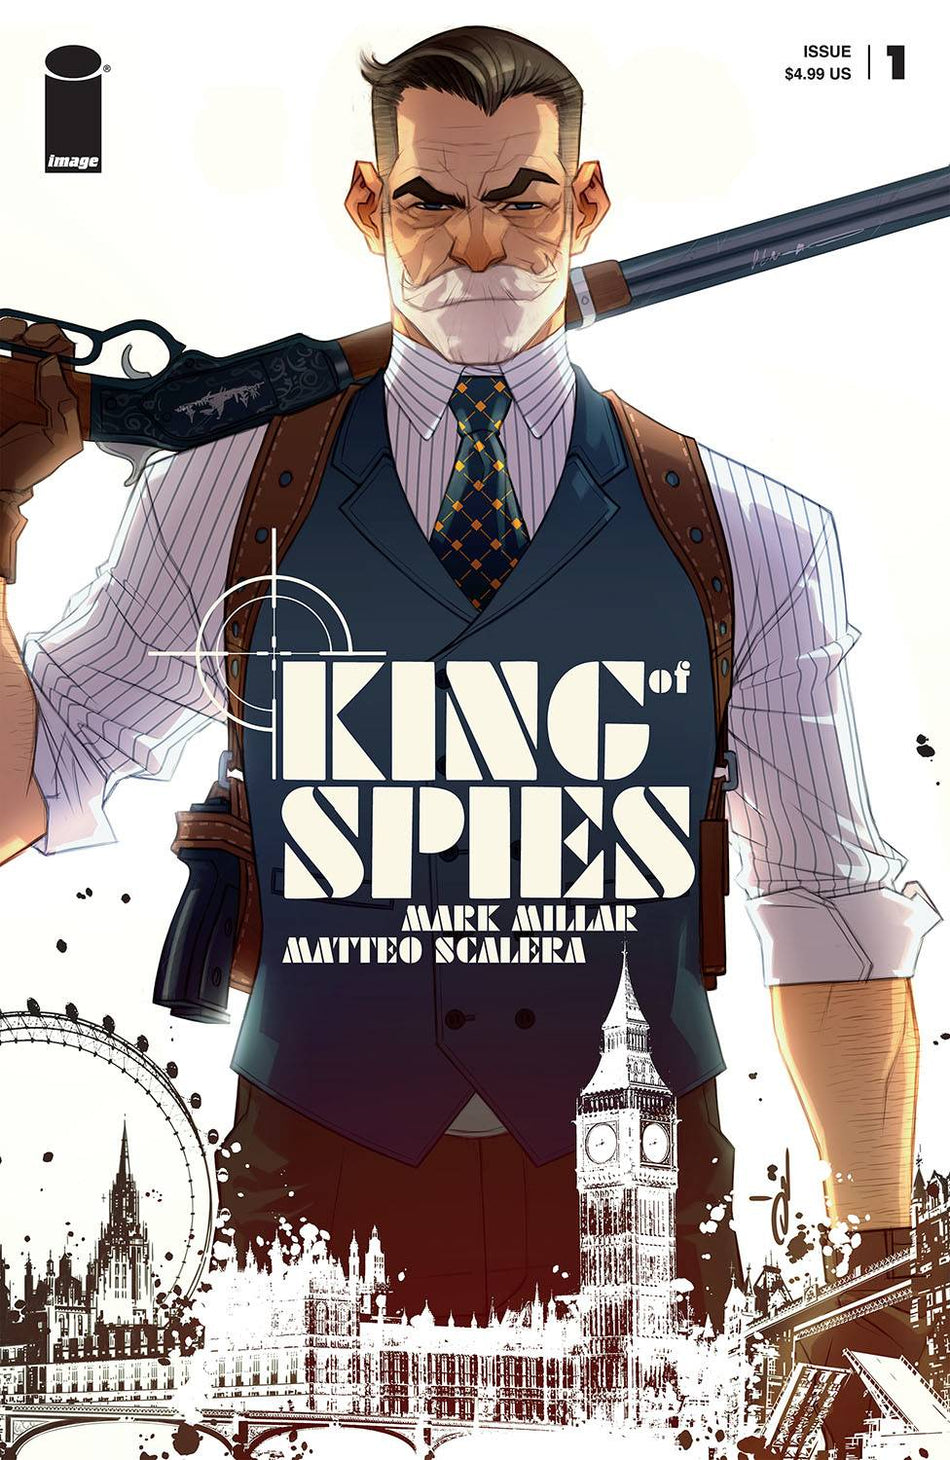 Photo of King of Spies Issue 1 (Of 4) CVR D Yildirim (MR) comic sold by Stronghold Collectibles